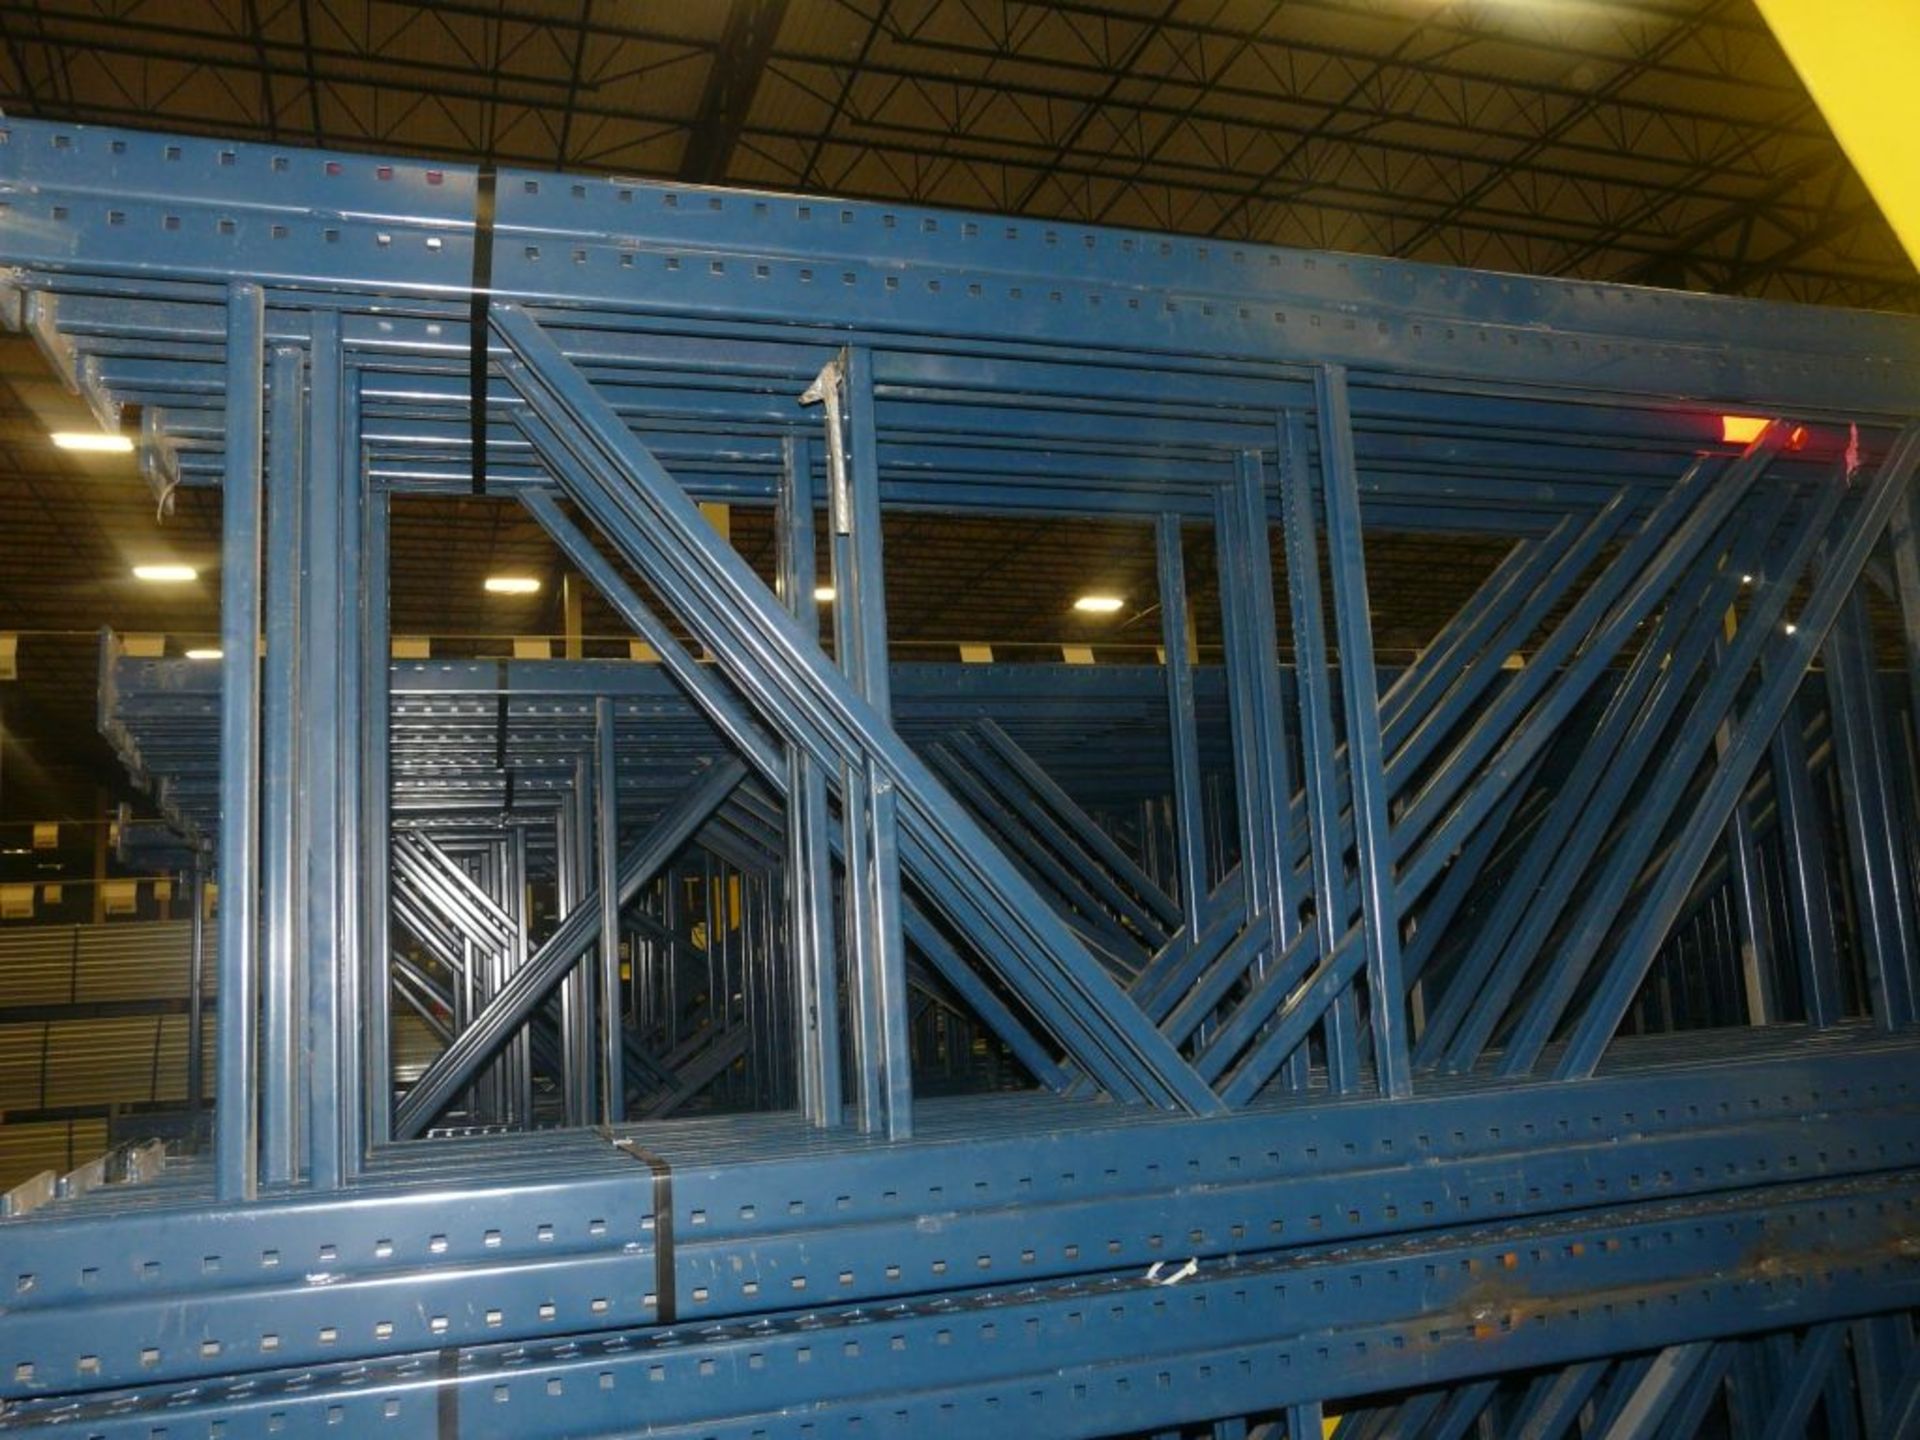 Lot of (10) 29'H x 42"W Double Column Uprights with 11' Second Column - Tag: 224097 - $30 Lot - Image 3 of 3